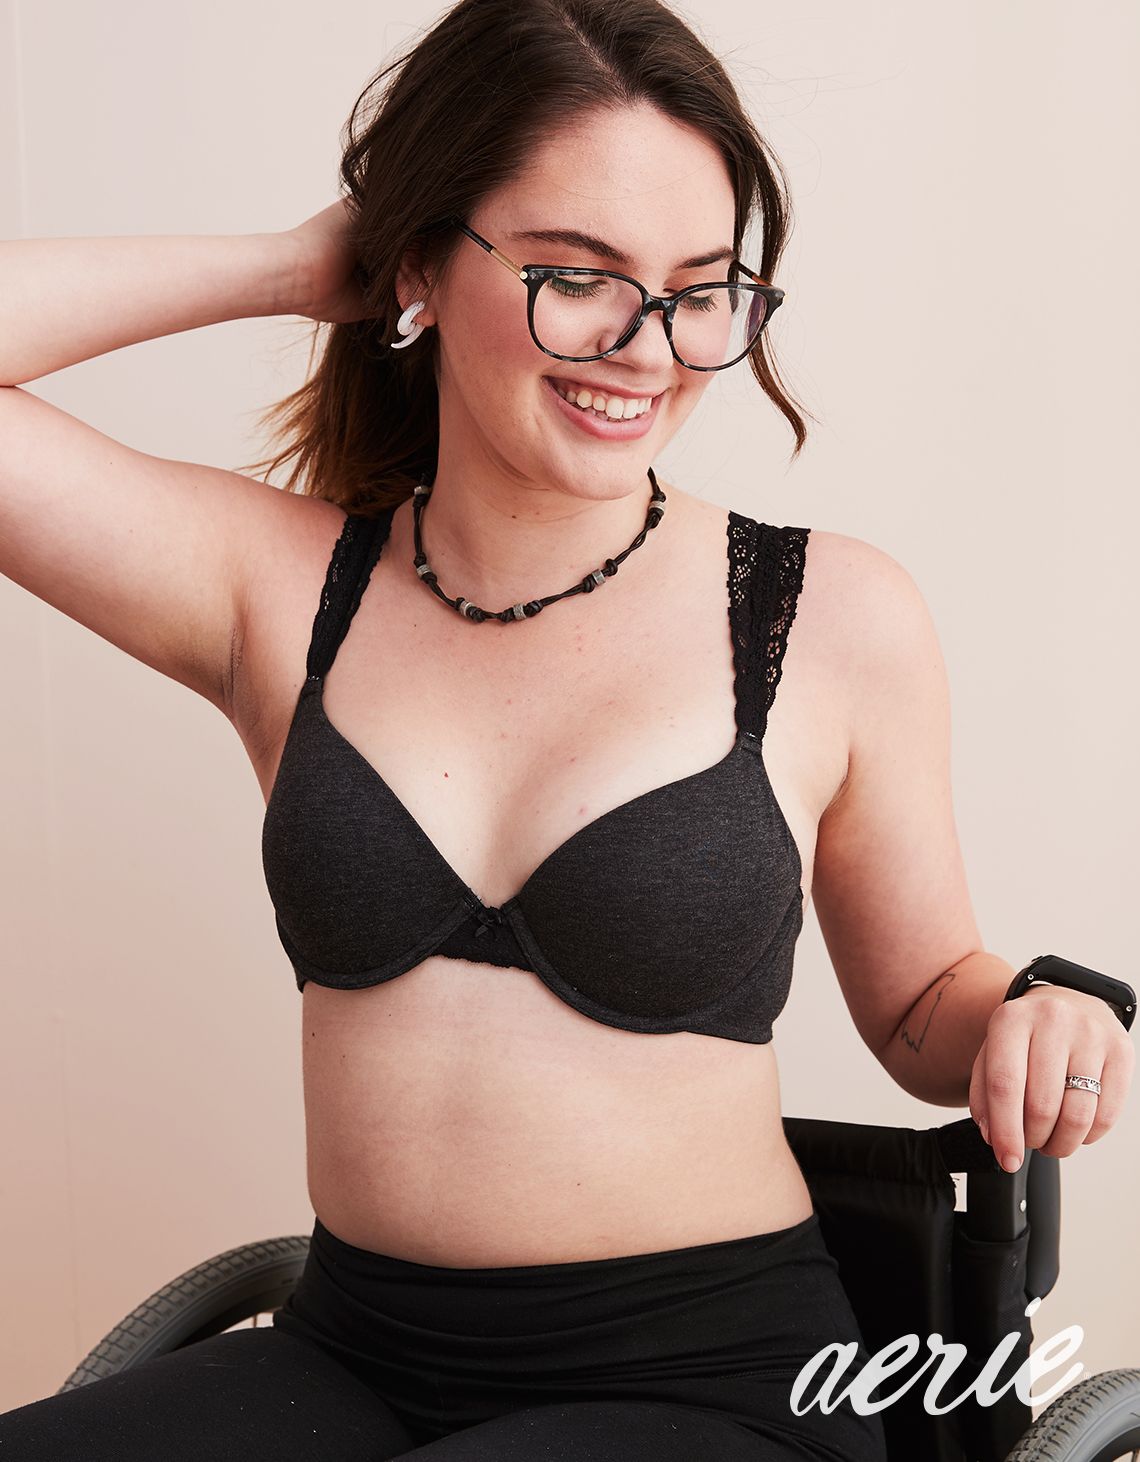 Aerie Casts 57 Non-Models for Its Latest Lingerie Campaign